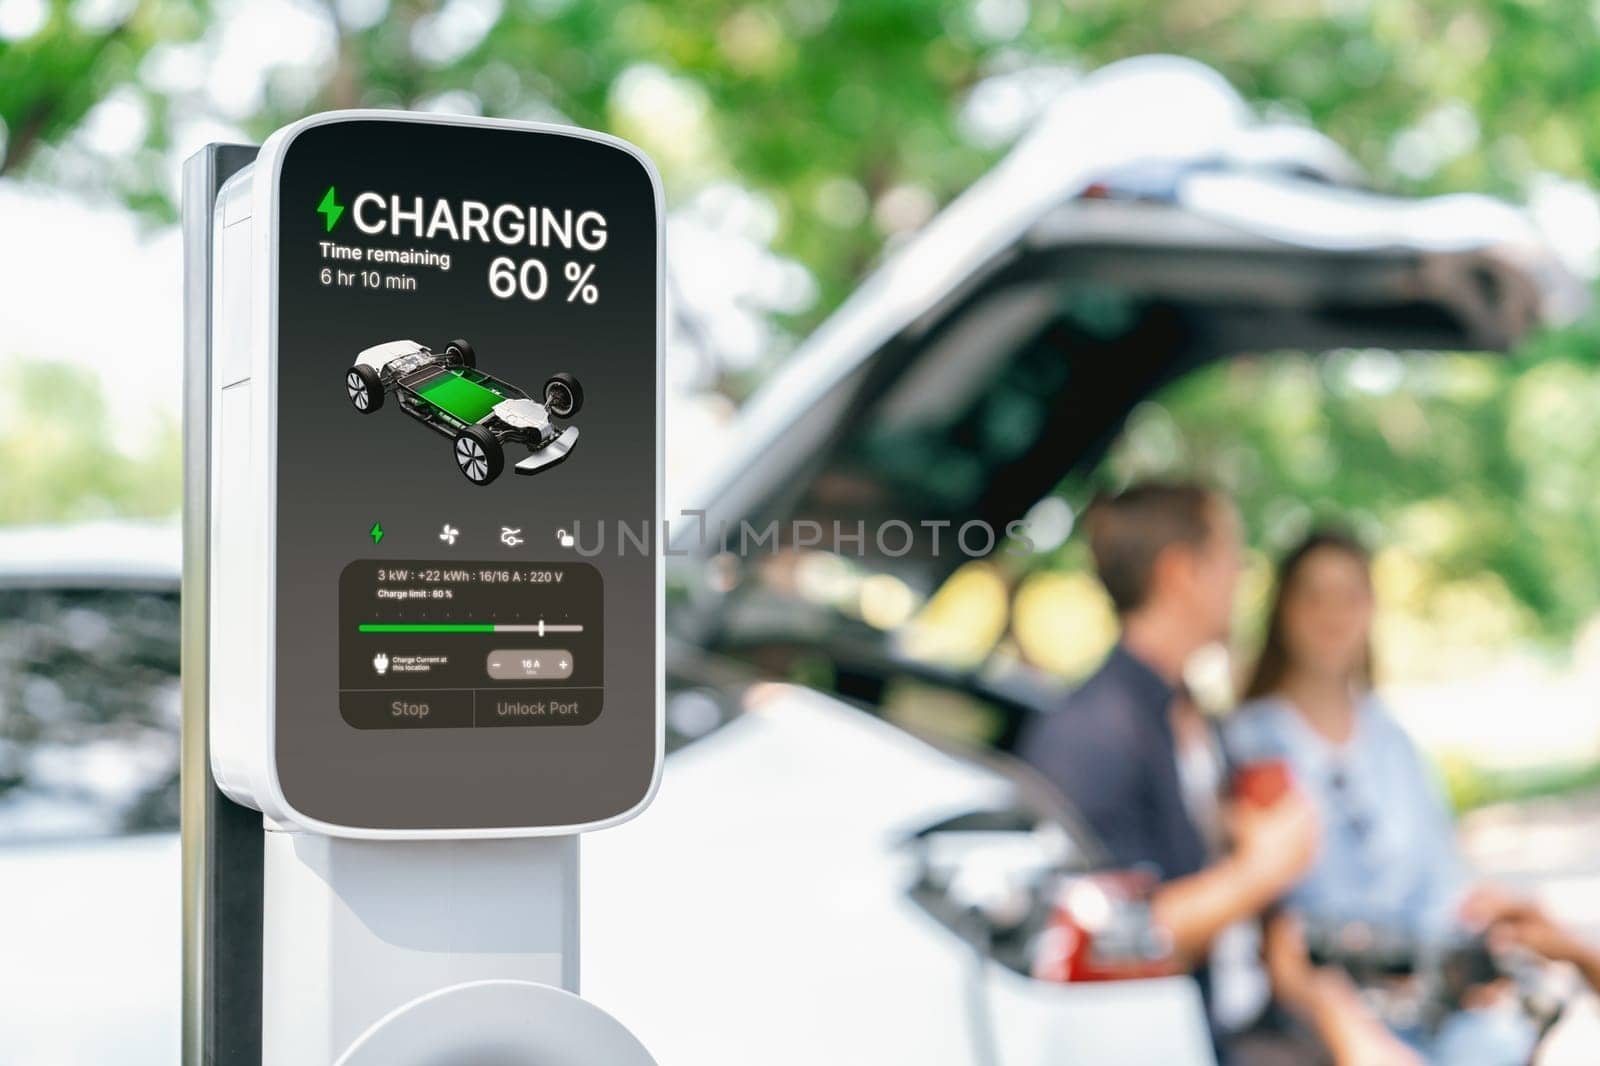 Focused EV charging station monitor display battery status for. Exalt by biancoblue